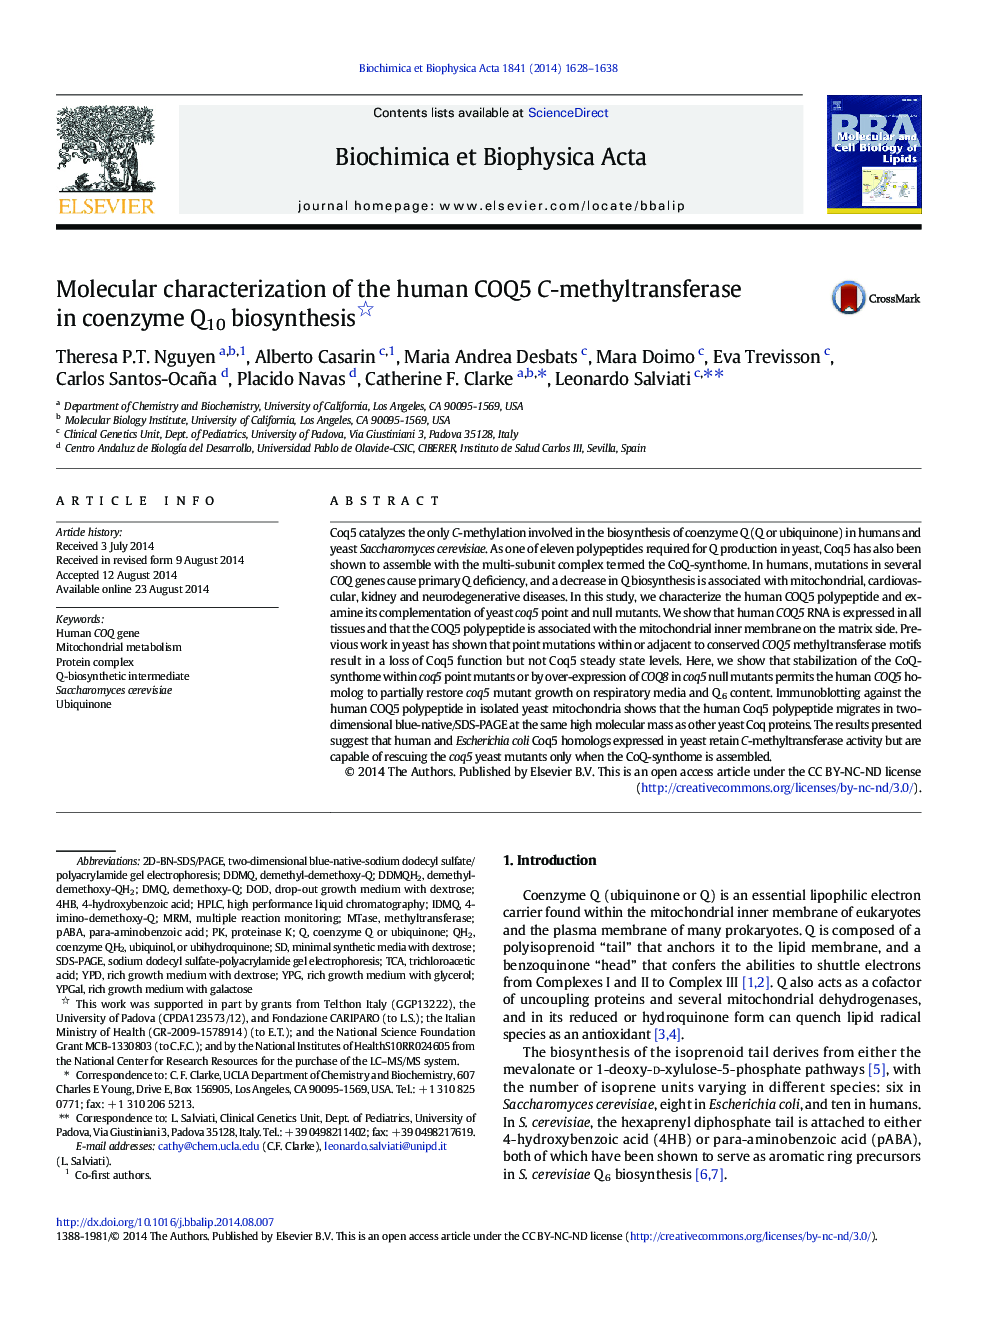 Molecular characterization of the human COQ5 C-methyltransferase in coenzyme Q10 biosynthesis